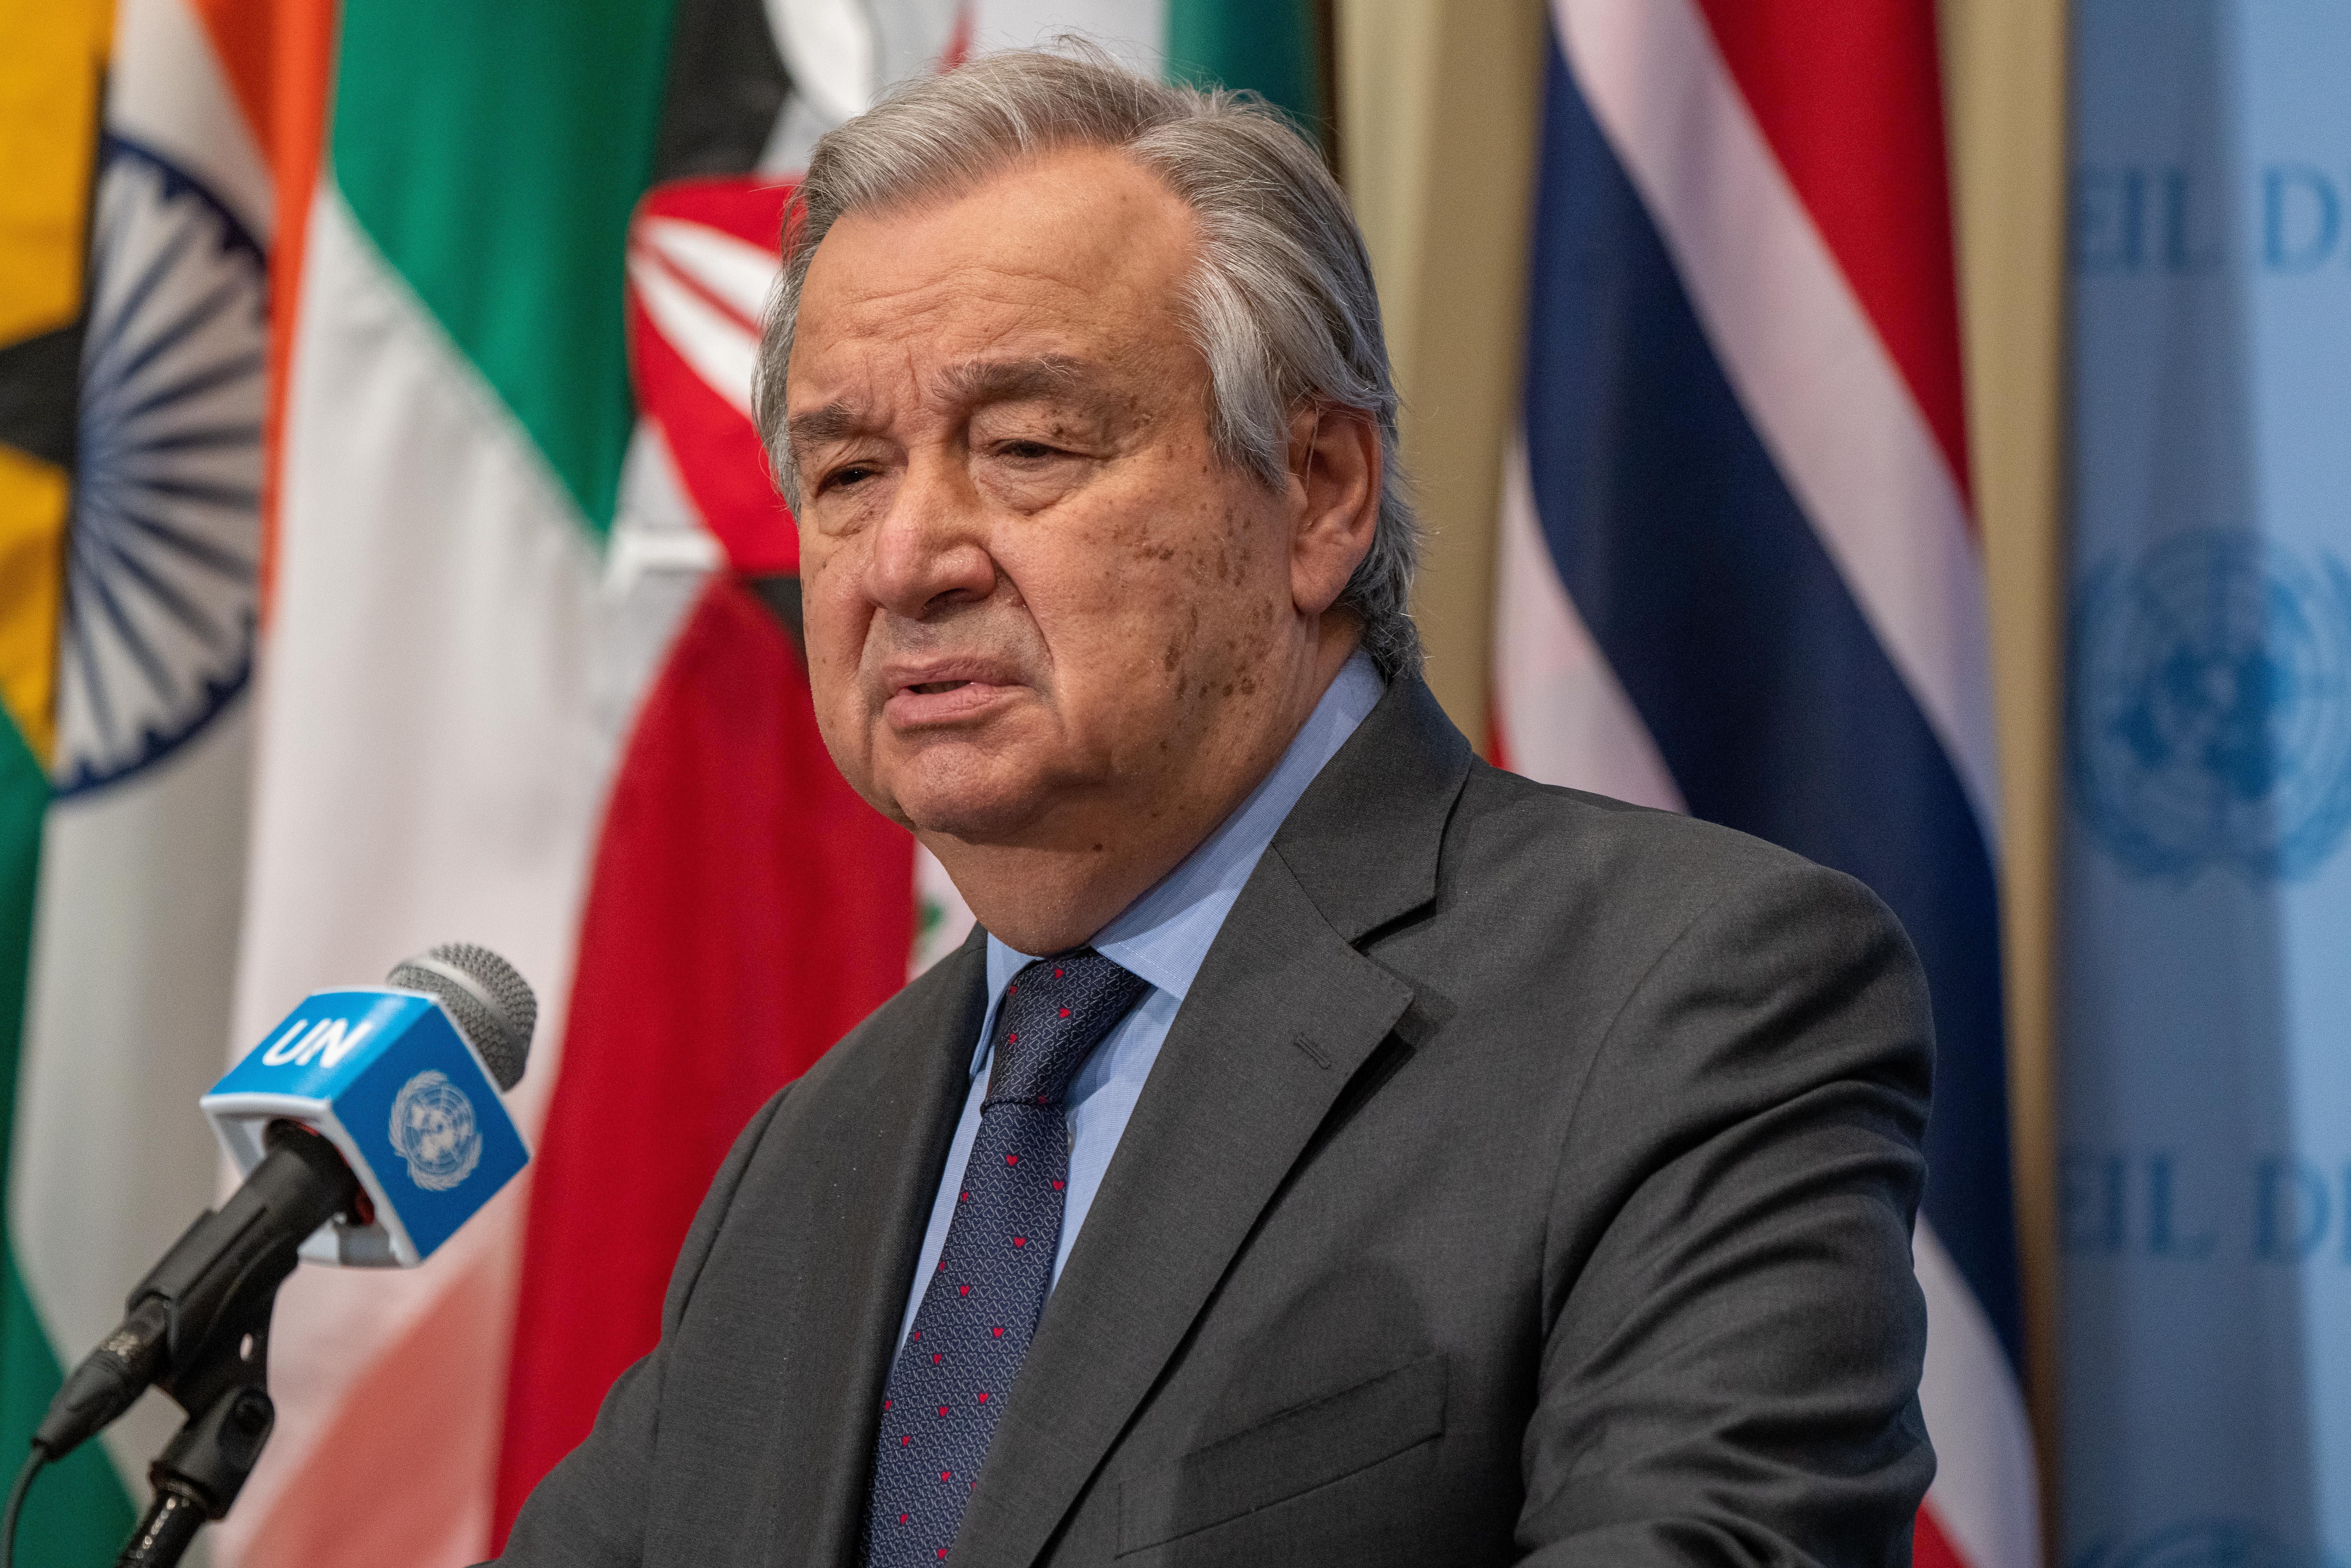 United Nations Secretary-General António Guterres speaks after the U.N. Security Council's emergency meeting to discuss the threat of a full-scale invasion of Ukraine by Russia on February 23, 2022 in New York City.